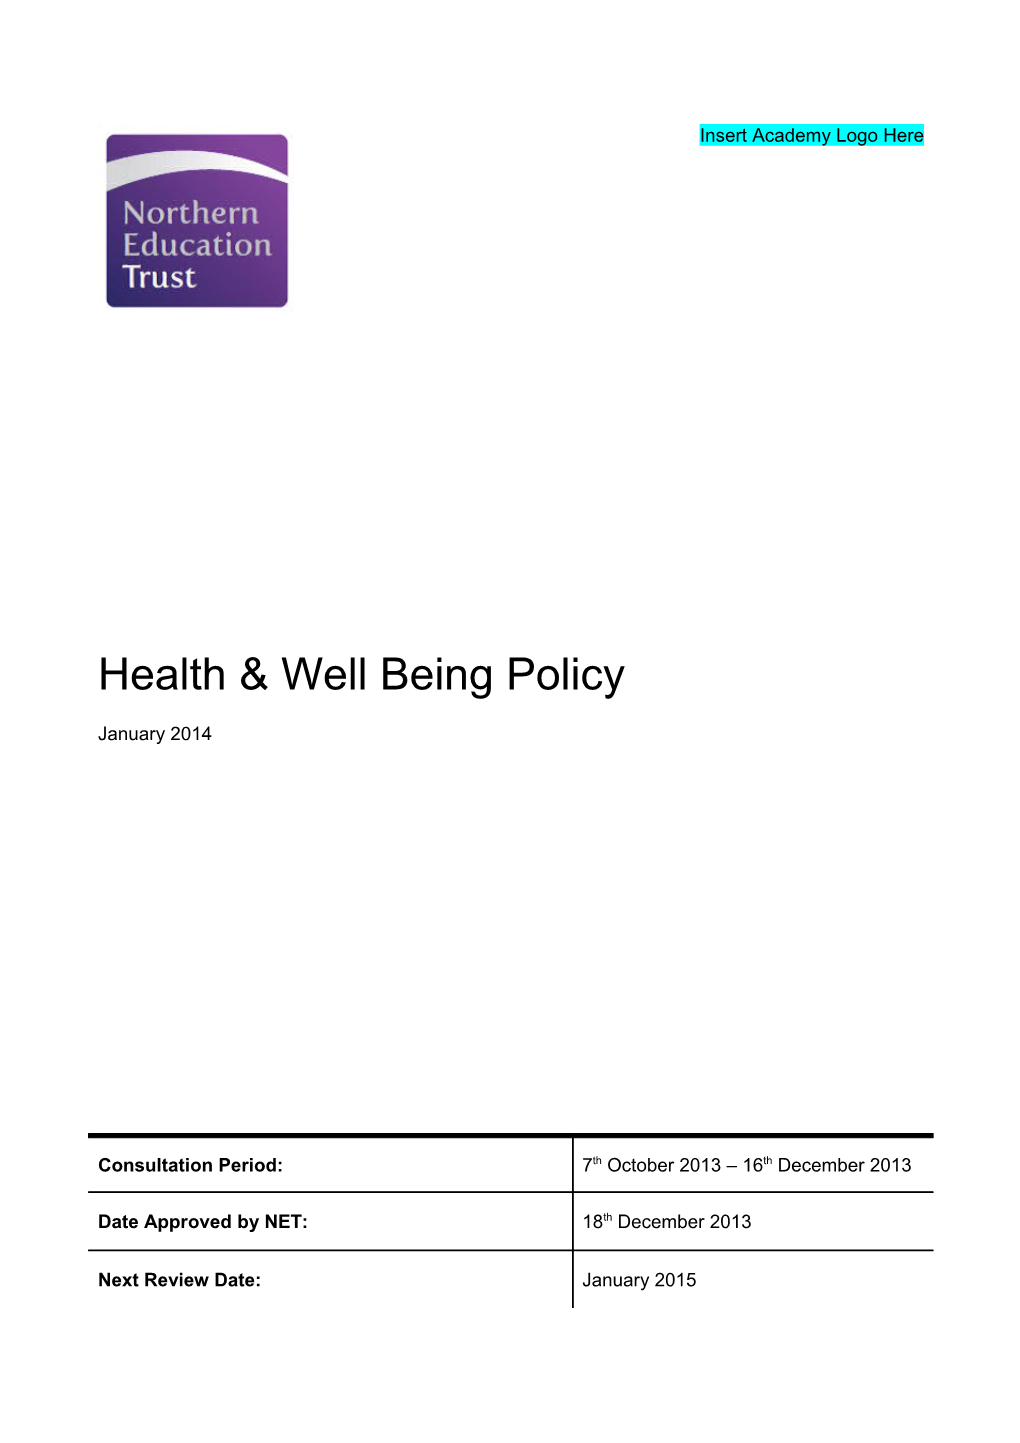 Health & Well Being Policy